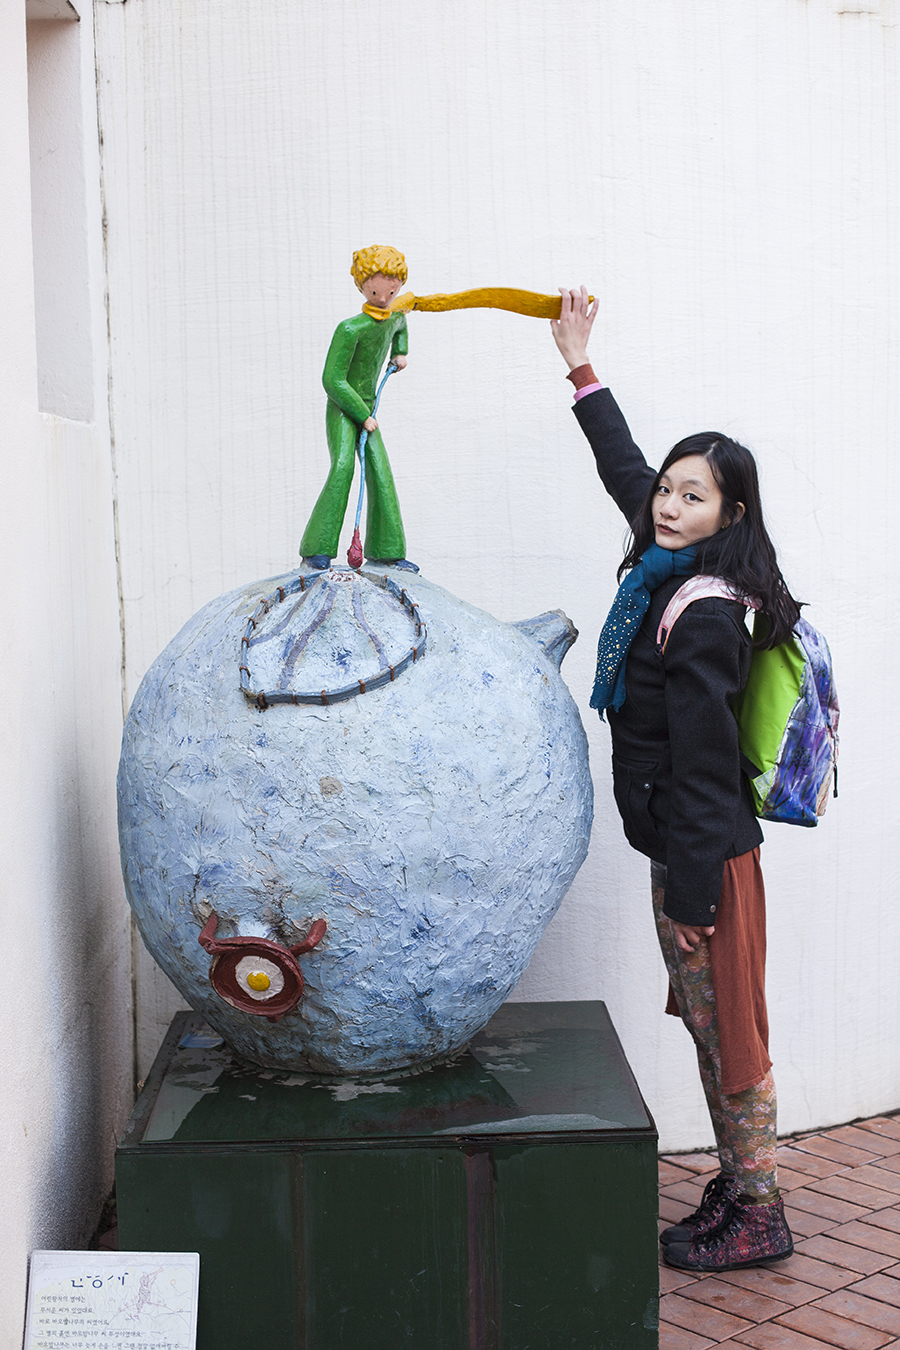 Posing with a sculpture of  the Little Prince on an asteroid at Le Petit France, Gapyeong, South Korea.